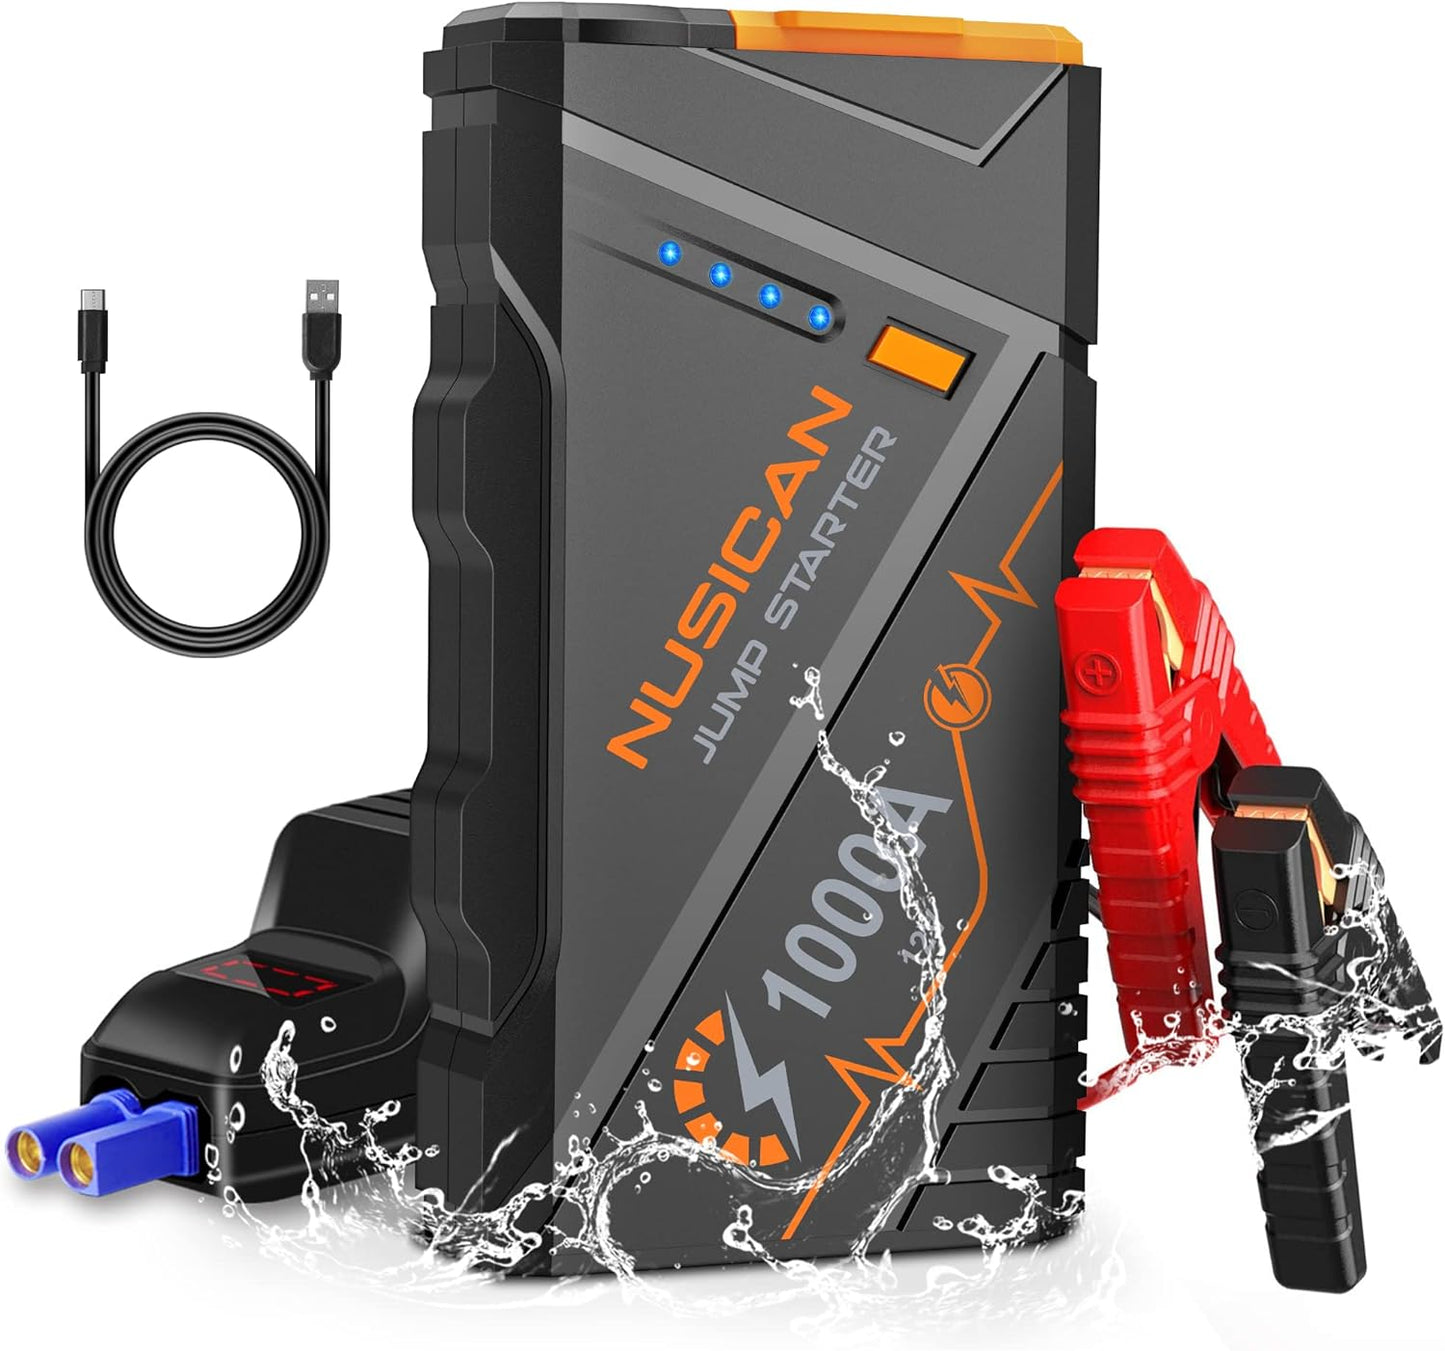 NUSICAN Car Battery Jump Starter, 1000A Peak 12V Auto Lithium Jump Starter, Portable Car Battery Booster Power Pack for up 7L Gas or 5.5L Diesel Engine, LED Flashlight & USB Quick Charge